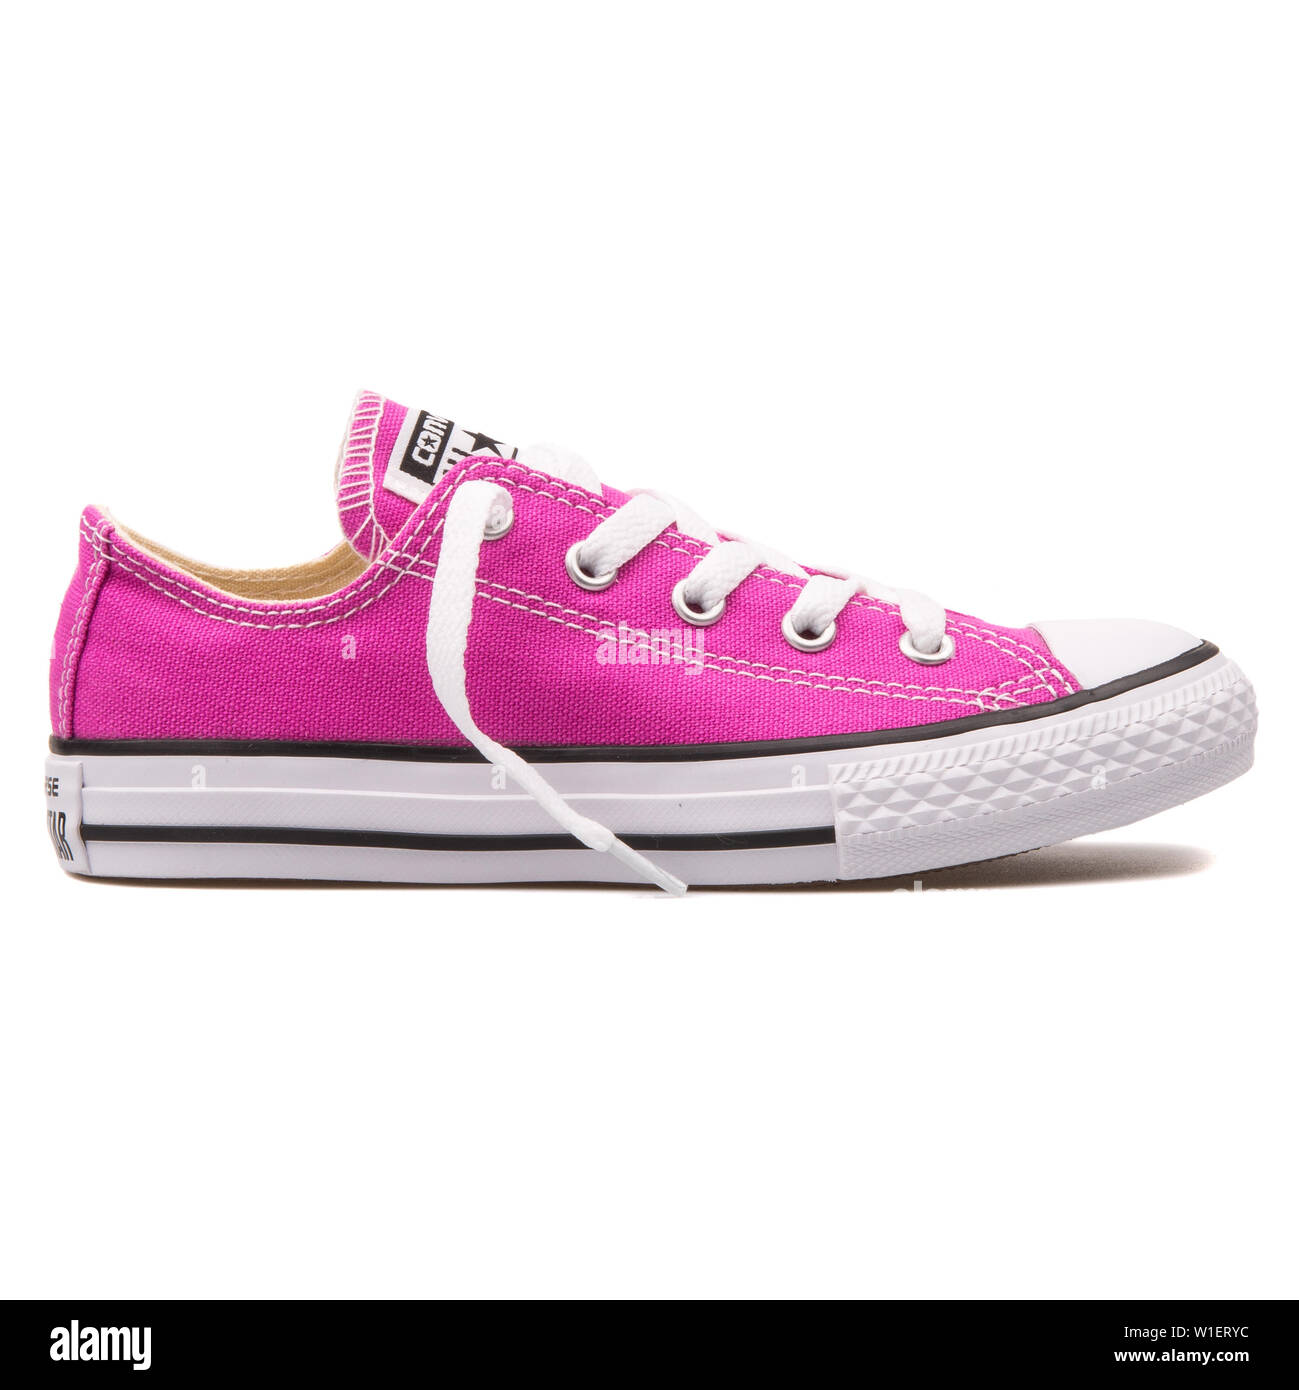 converse all star austria Online Shopping for Women, Men, Kids Fashion &  Lifestyle|Free Delivery & Returns! -